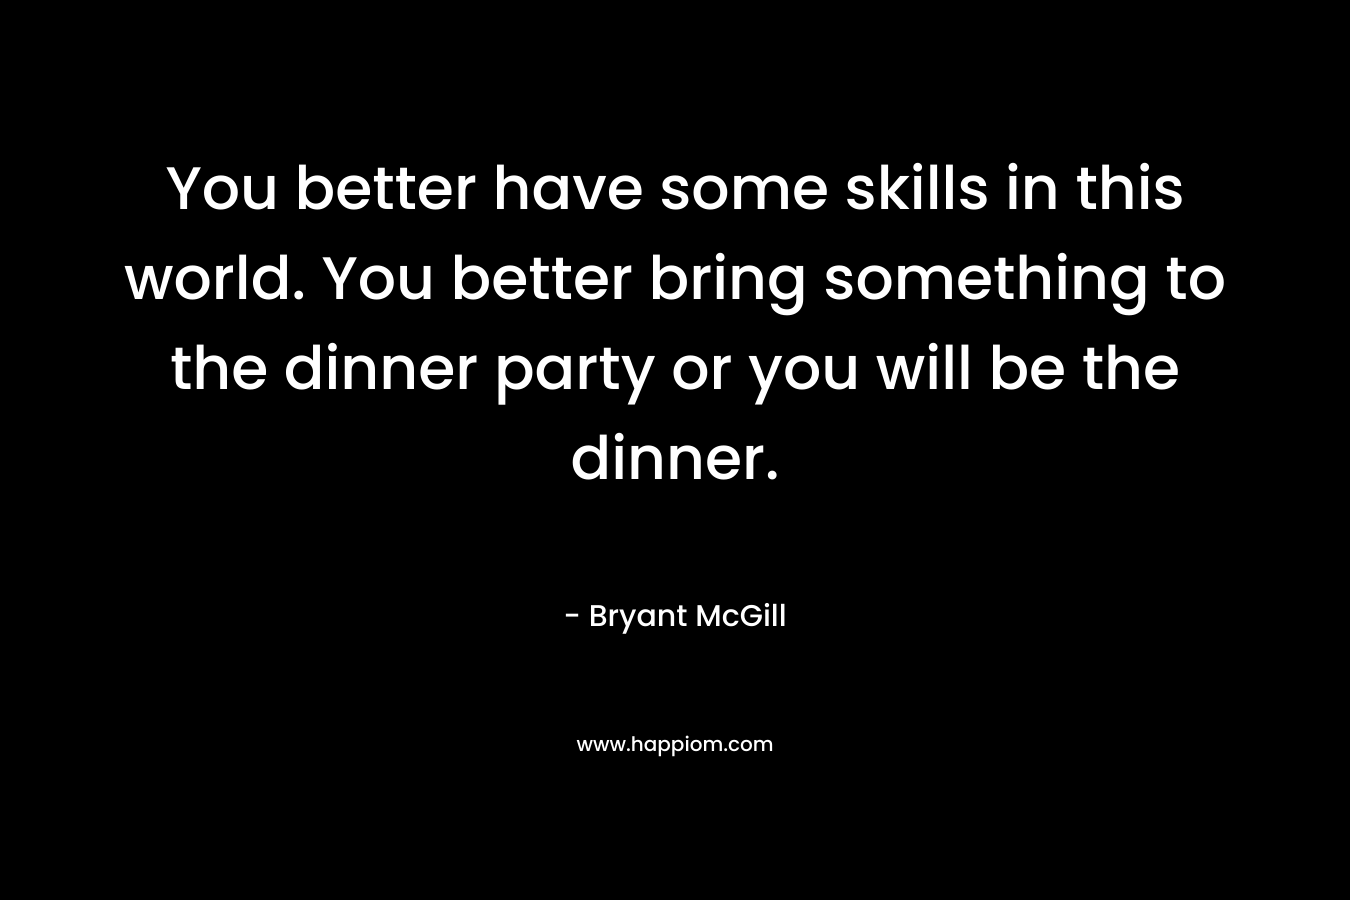 You better have some skills in this world. You better bring something to the dinner party or you will be the dinner.